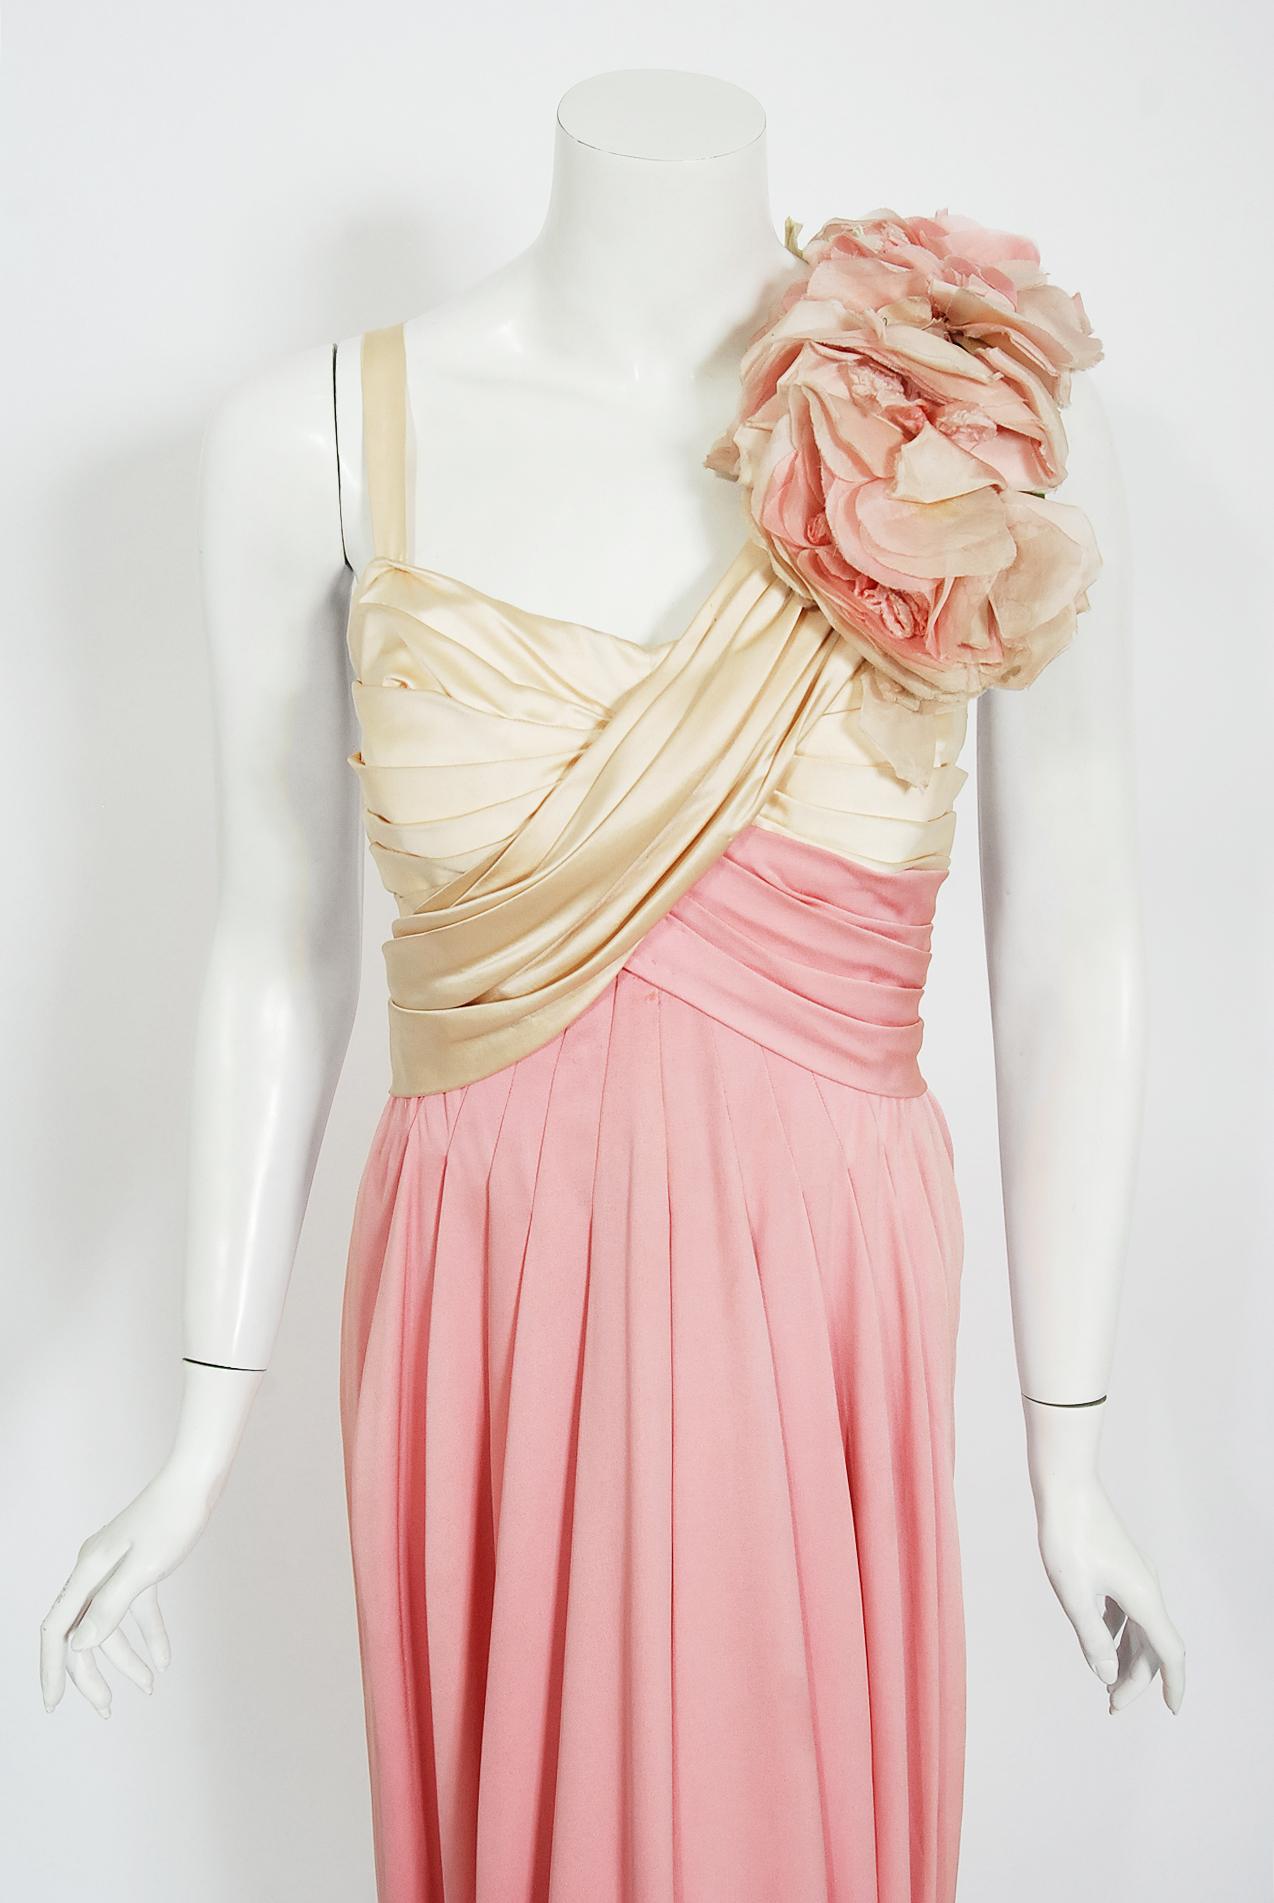 A breathtaking pale pink silk and ivory satin custom-made 20th Century Fox gown dating back to the early 1960's. Though I am unsure of which production this gorgeous gown is from, the detailed construction and meticulous attention to detail makes me